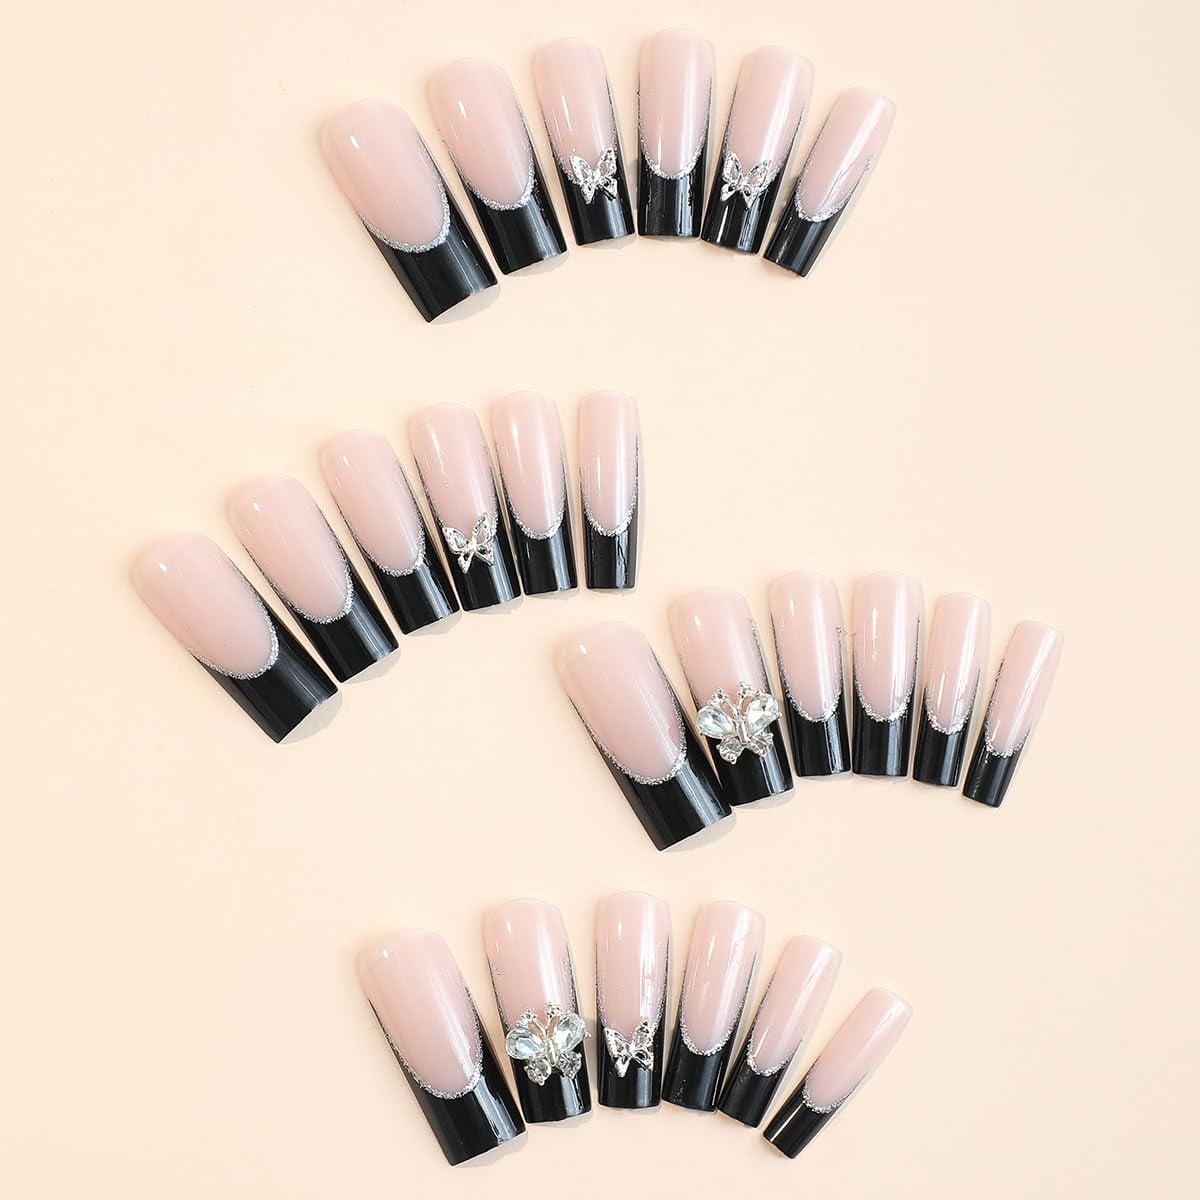 Gleevia Artificial Nails Natural White Short Oval Shape | Finger Nail  Extension UV/LED Acrylic DIY Oval Nails Tip 500pc Unbreakable Fake Nails  Natural White - Price in India, Buy Gleevia Artificial Nails